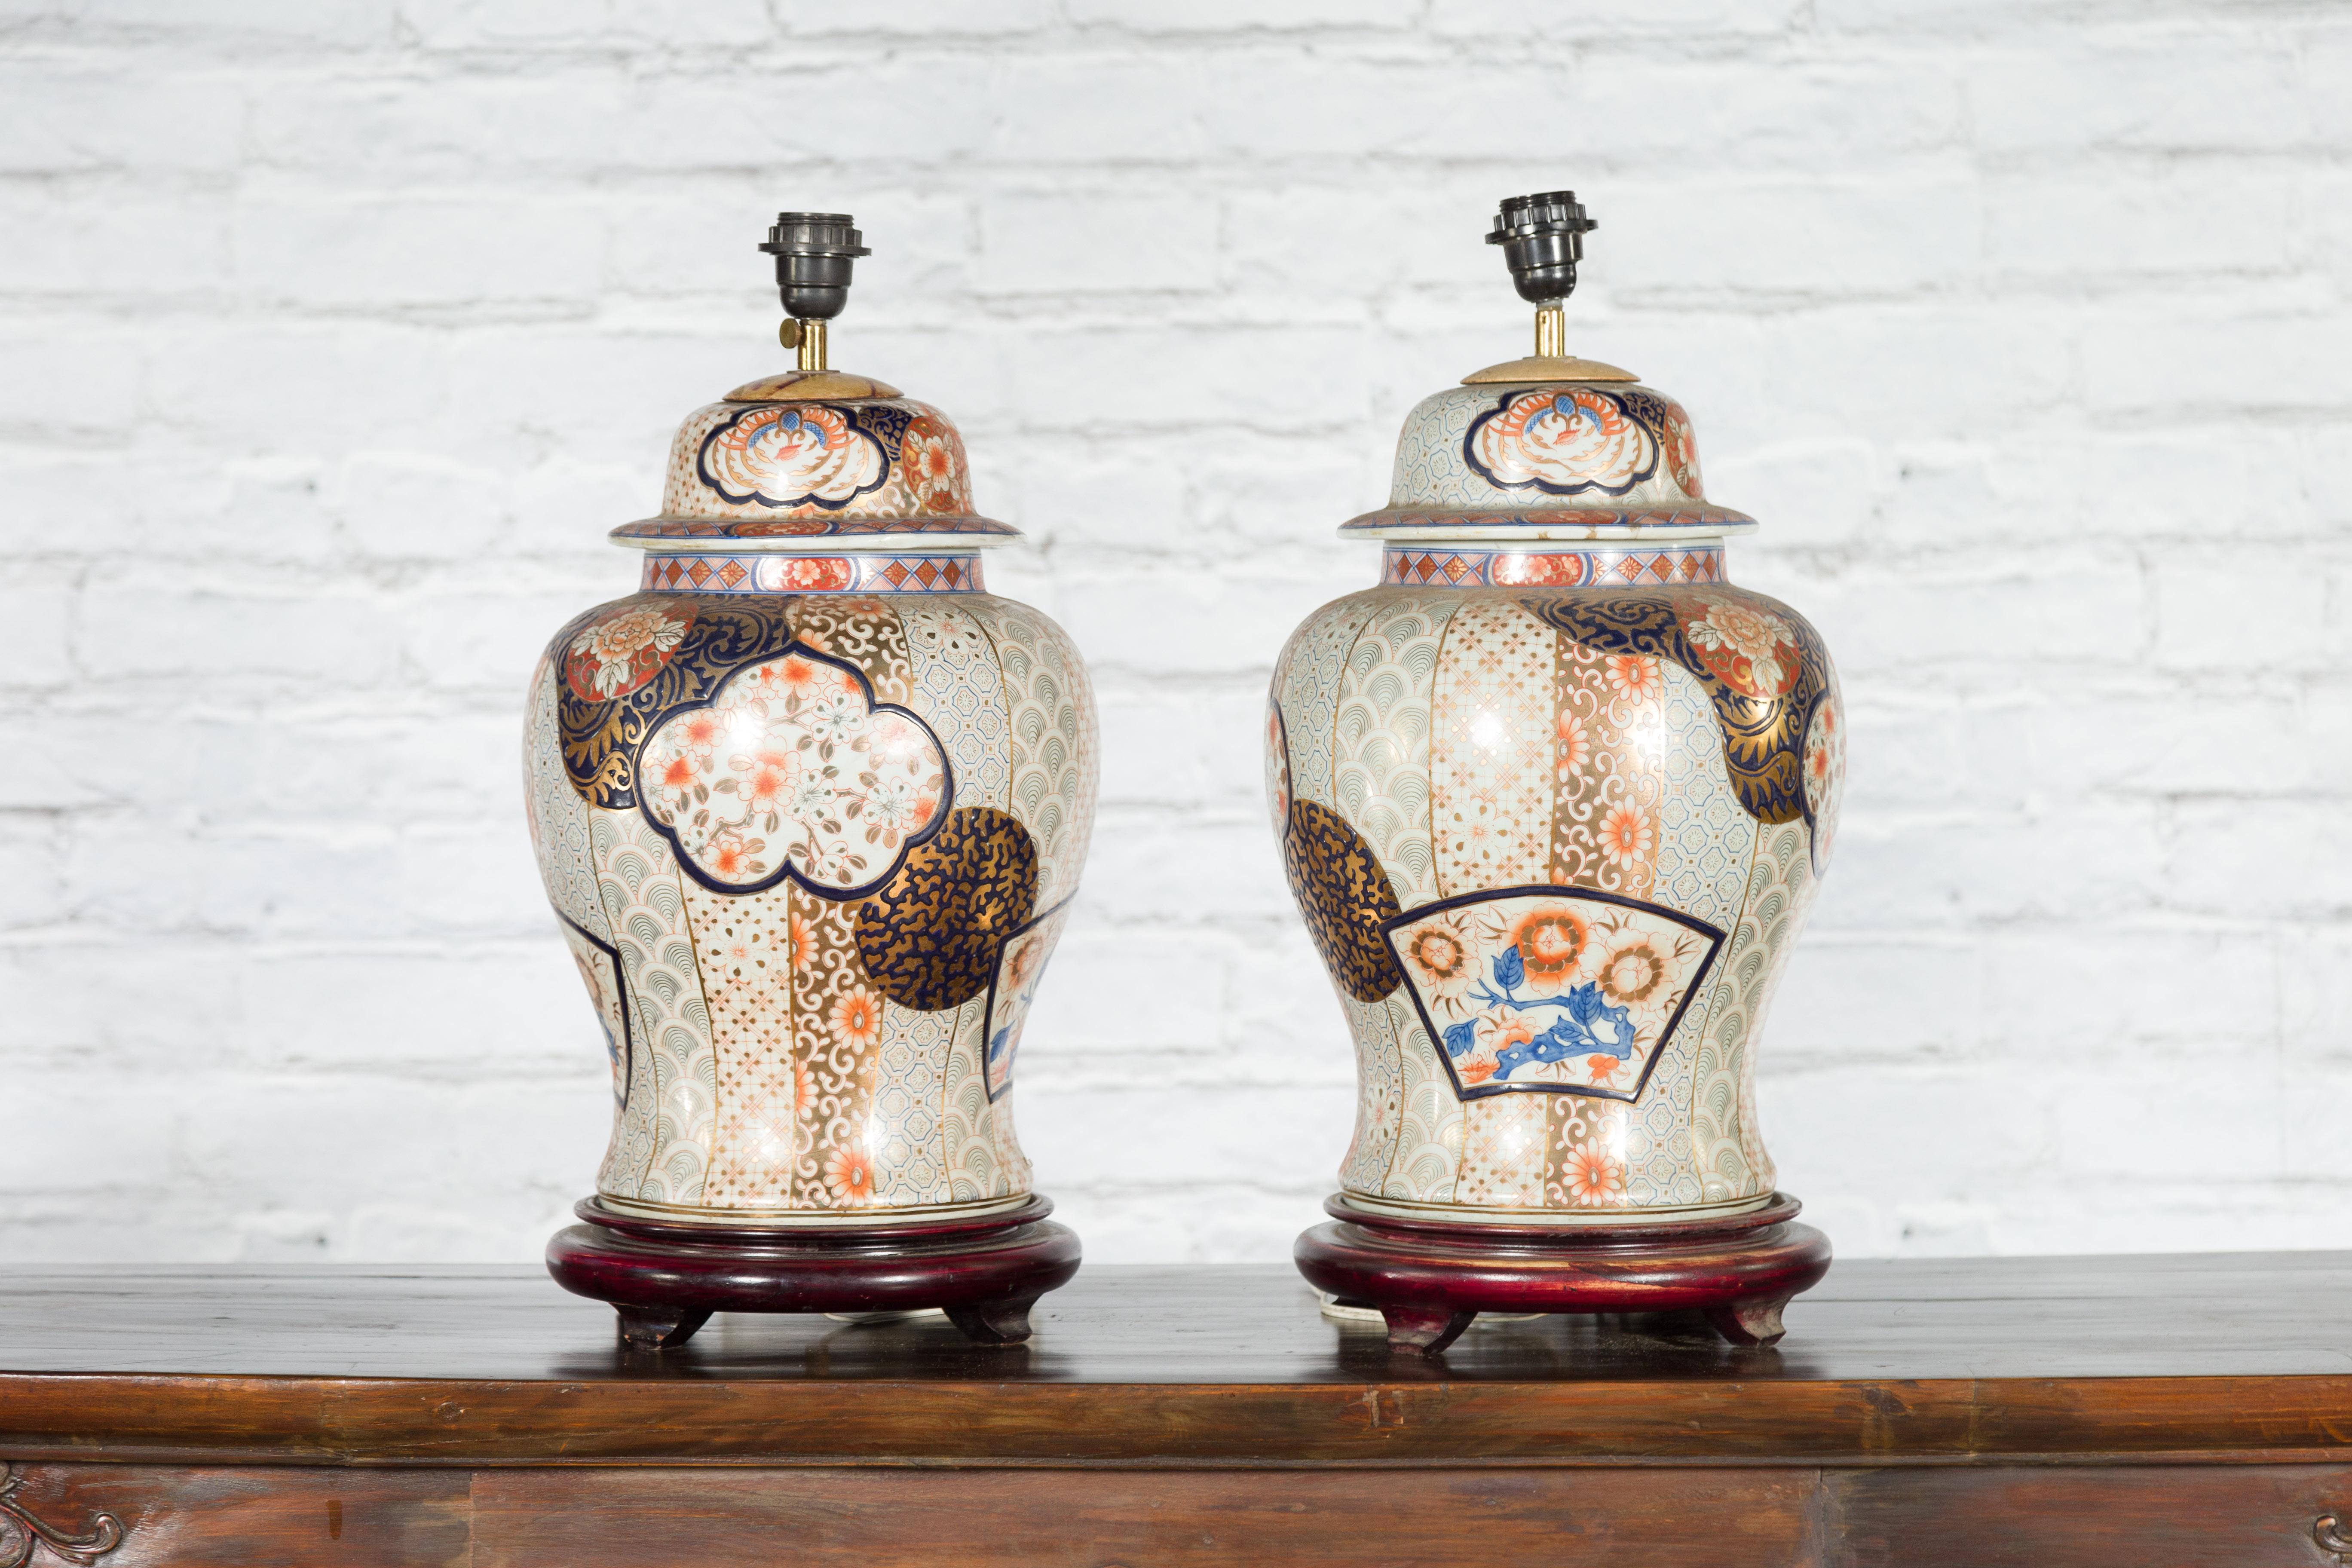 A pair of Japanese Arita porcelain table lamps from the mid-20th century, with gold, blue and orange tones, domed lids and round wooden bases. Created in Japan during the midcentury period, each of this pair of Arita ware vases, mounted as table